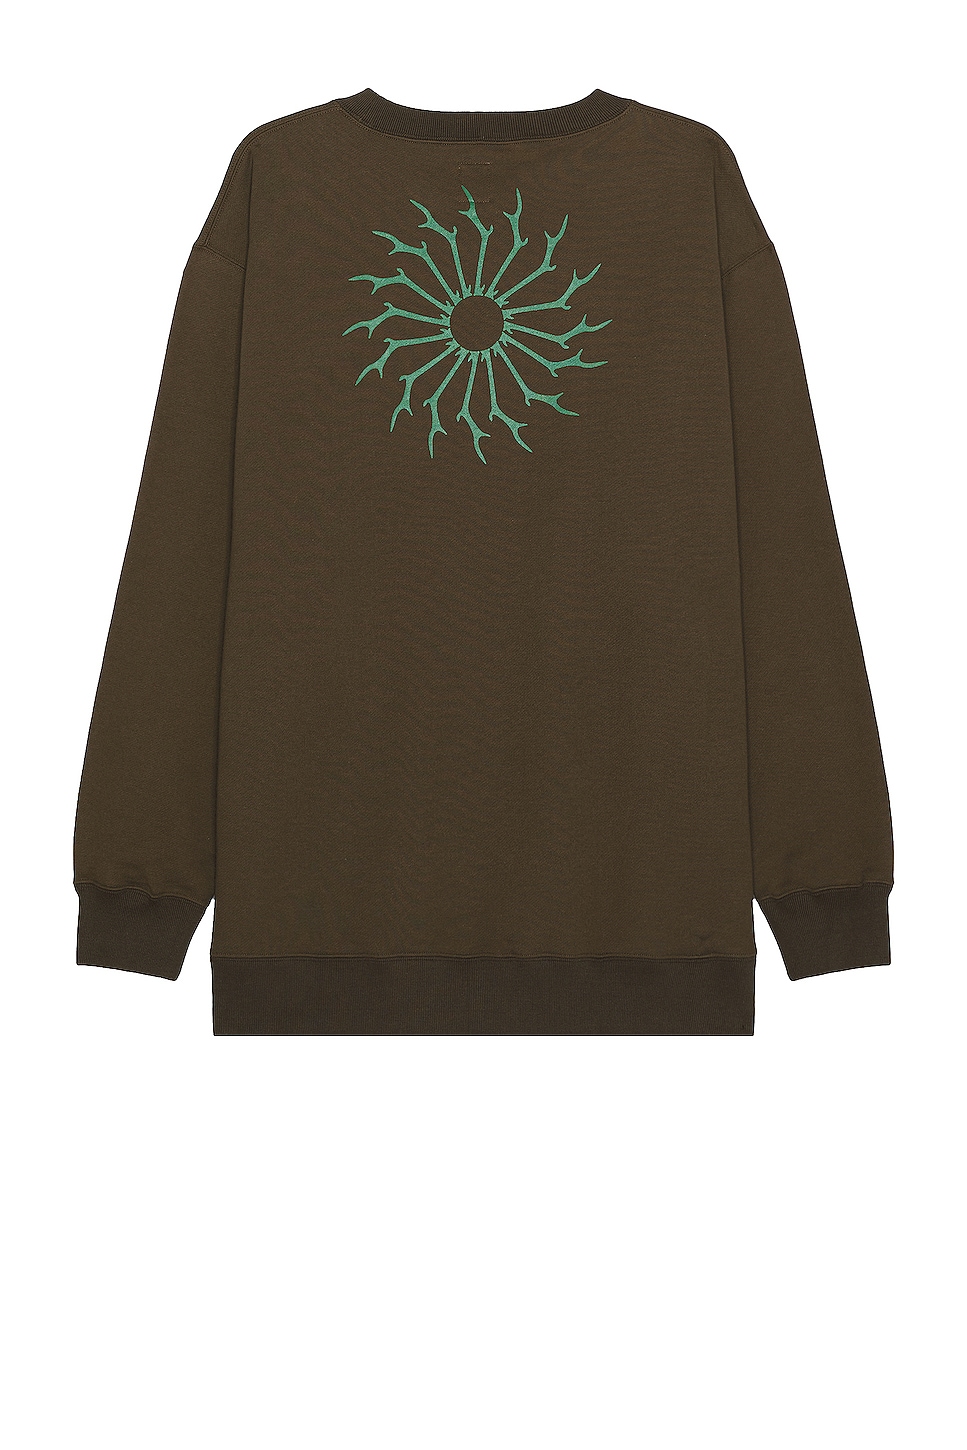 Image 1 of South2 West8 Crew Neck Sweat Shirt in Khaki